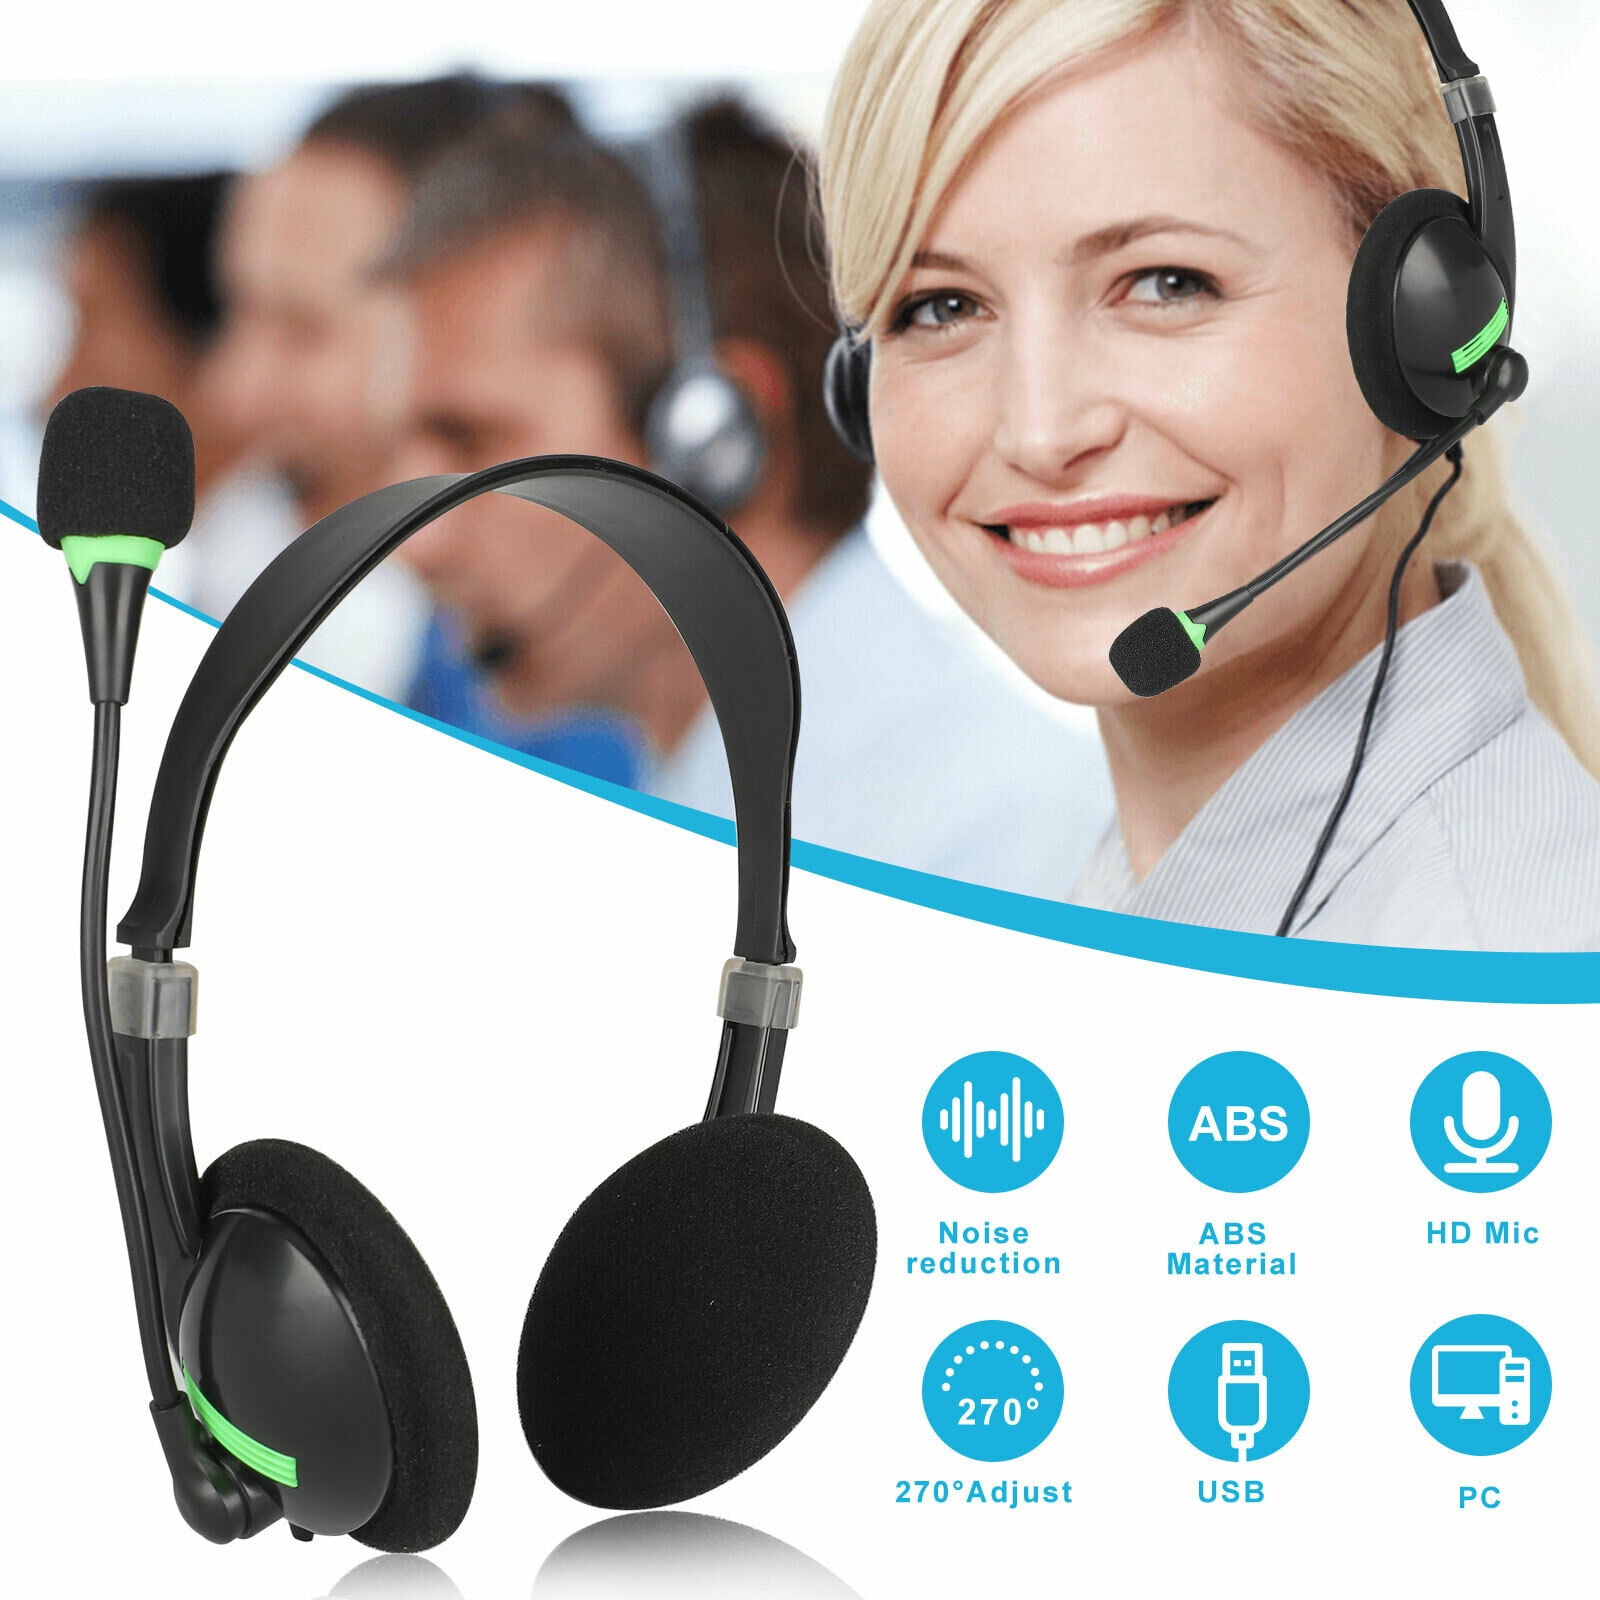 USB Headset with Microphone, Comfort-fit Office Computer Headphone, On-Ear 3.5mm Jack Call Center Headset for Cell Phone, 270 Degree Boom Mic, in-line Control with Mute for Skype, Webinar